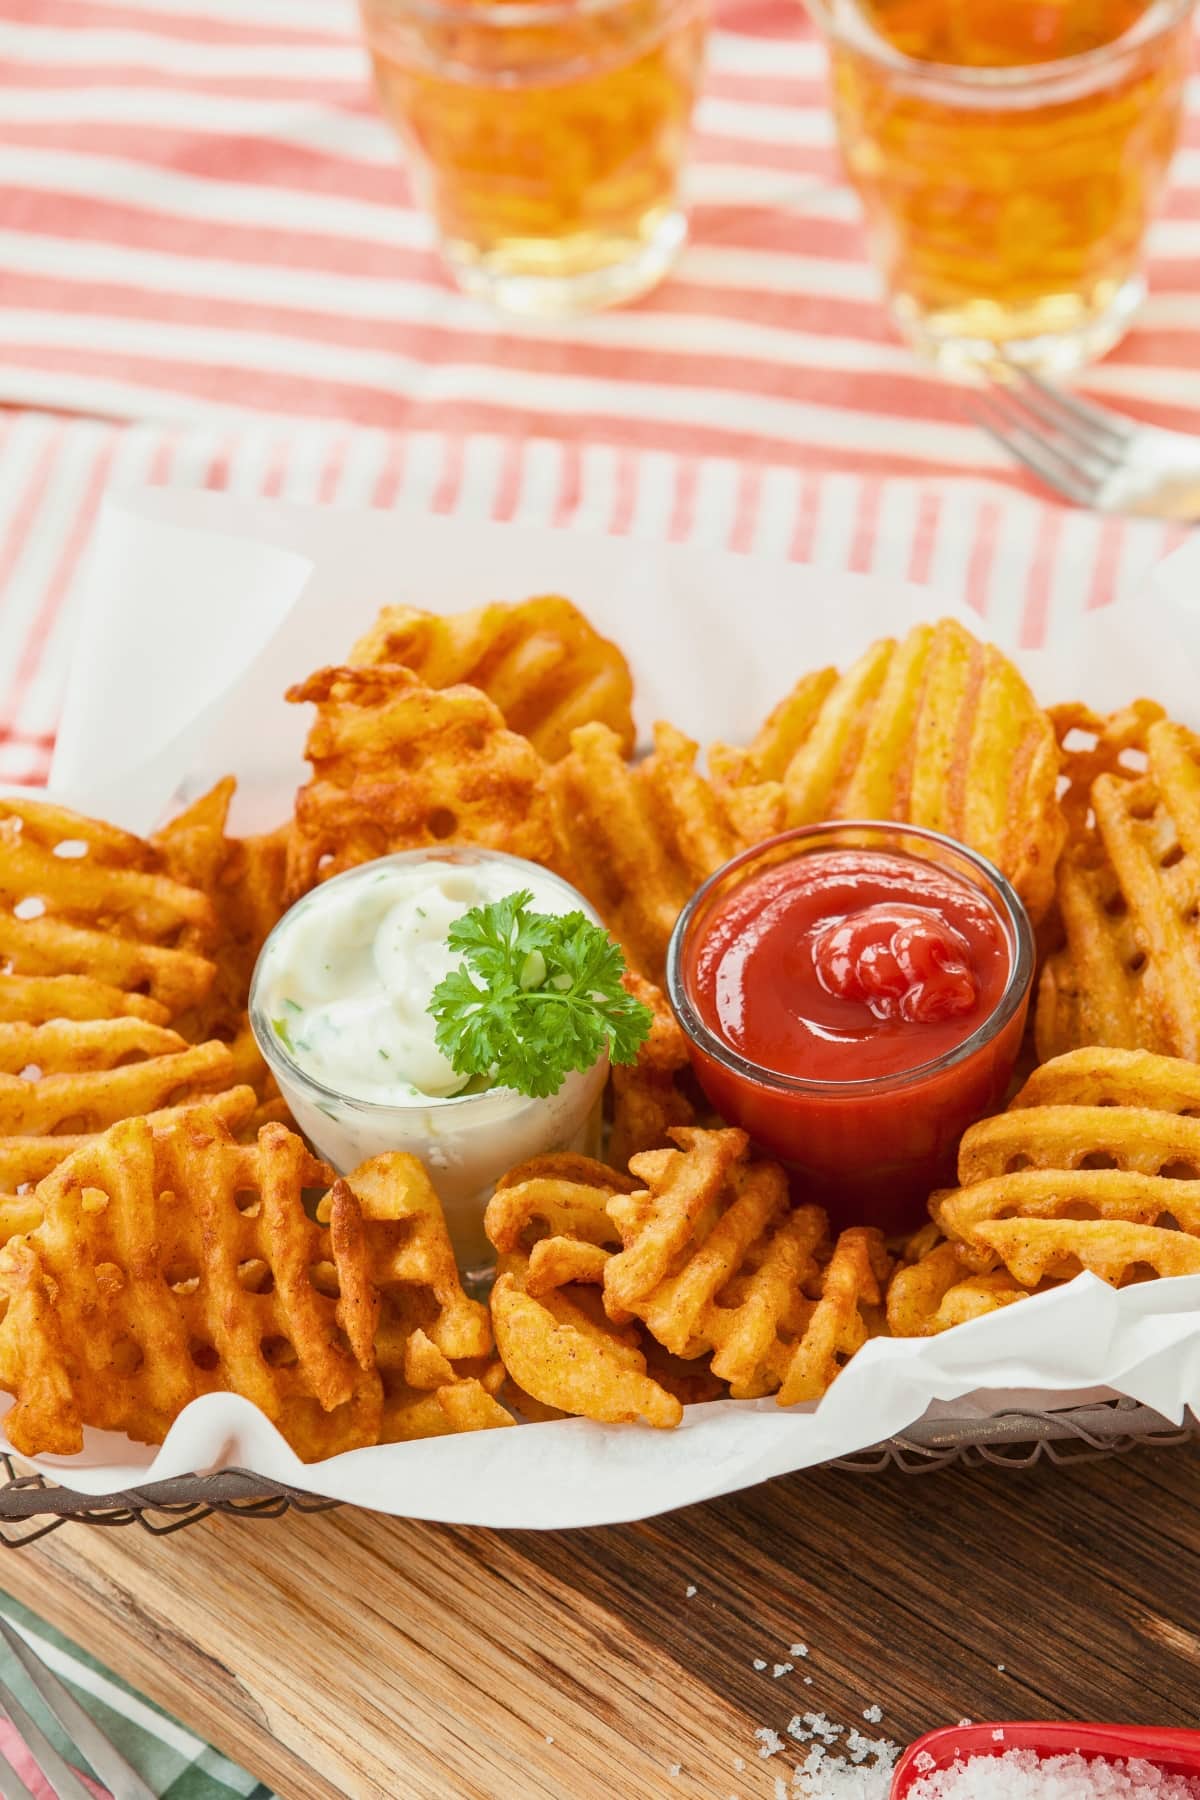 Waffle fries served with mayo and ketchup dip.